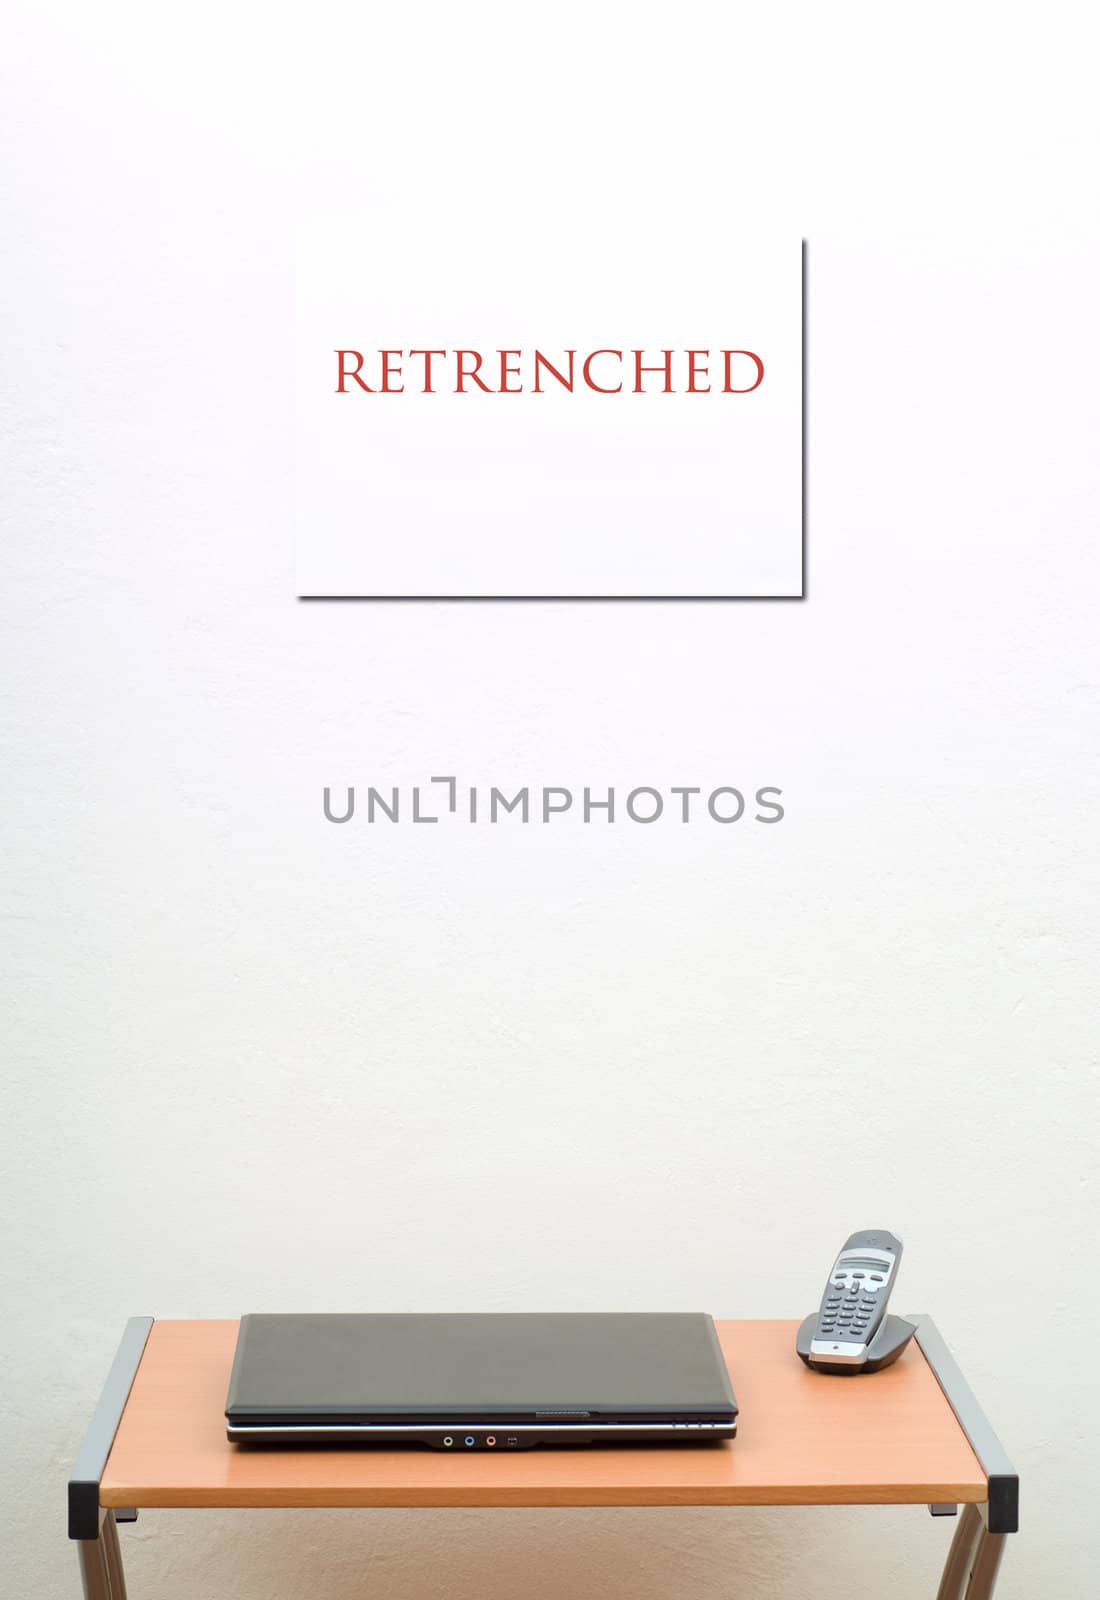 Retrenched sign on wall behind office desk with laptop and phone